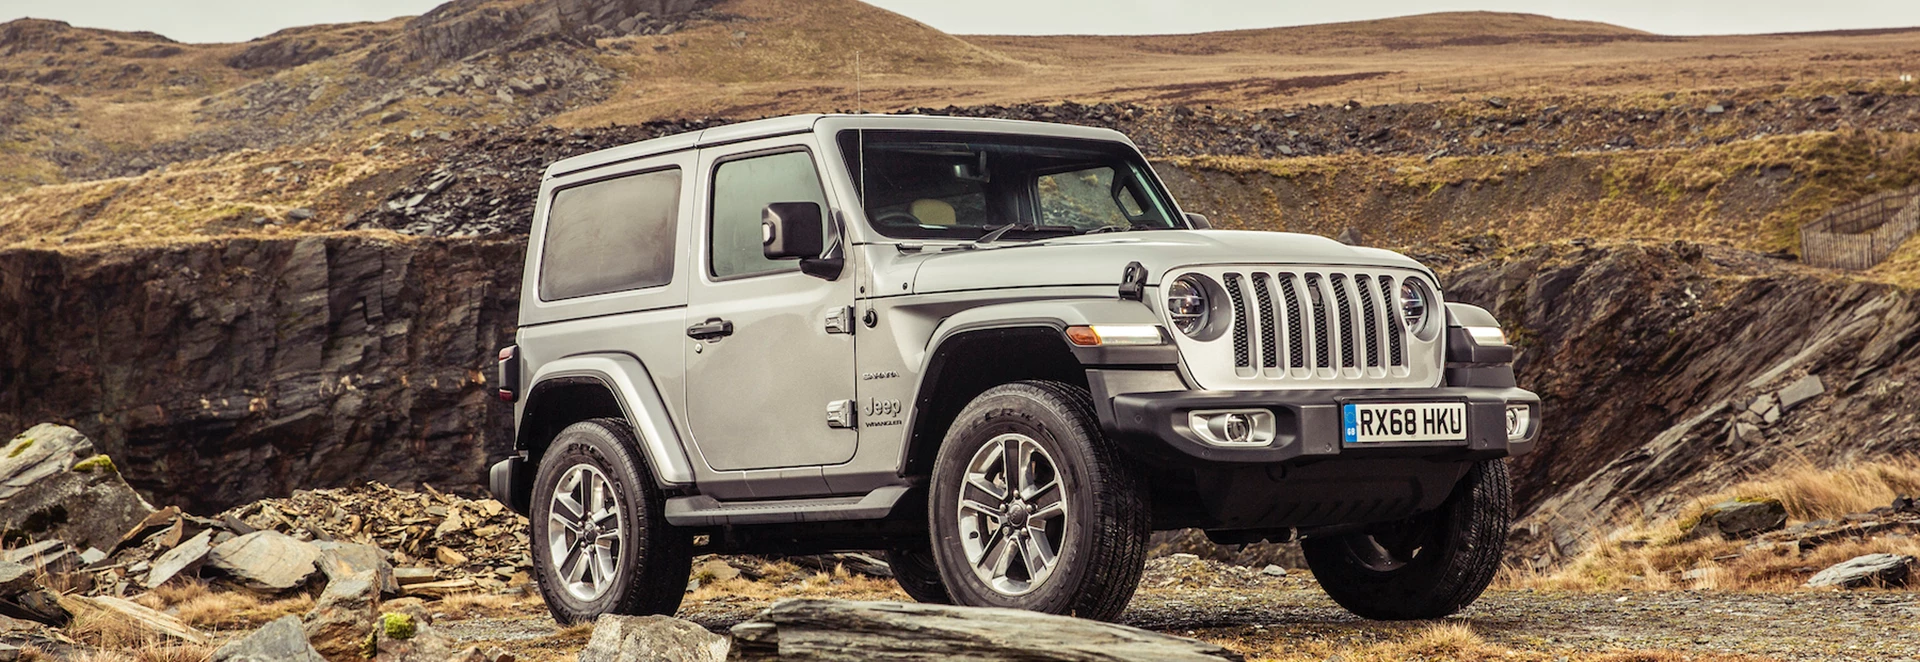 Buyer's guide to the Jeep Wrangler - Car Keys